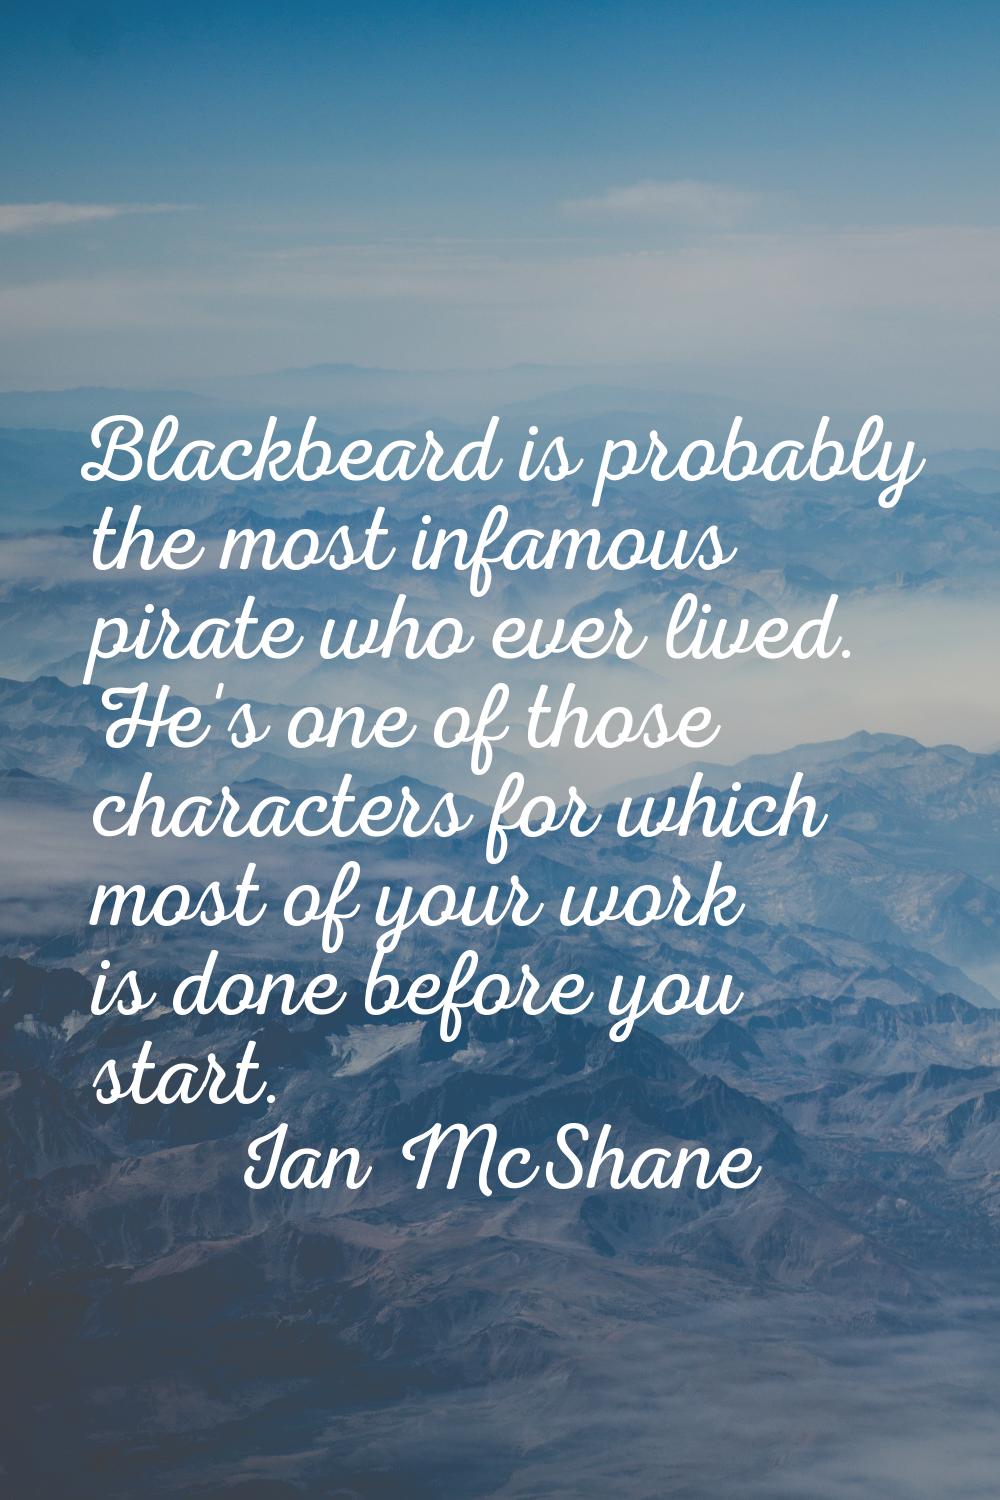 Blackbeard is probably the most infamous pirate who ever lived. He's one of those characters for wh